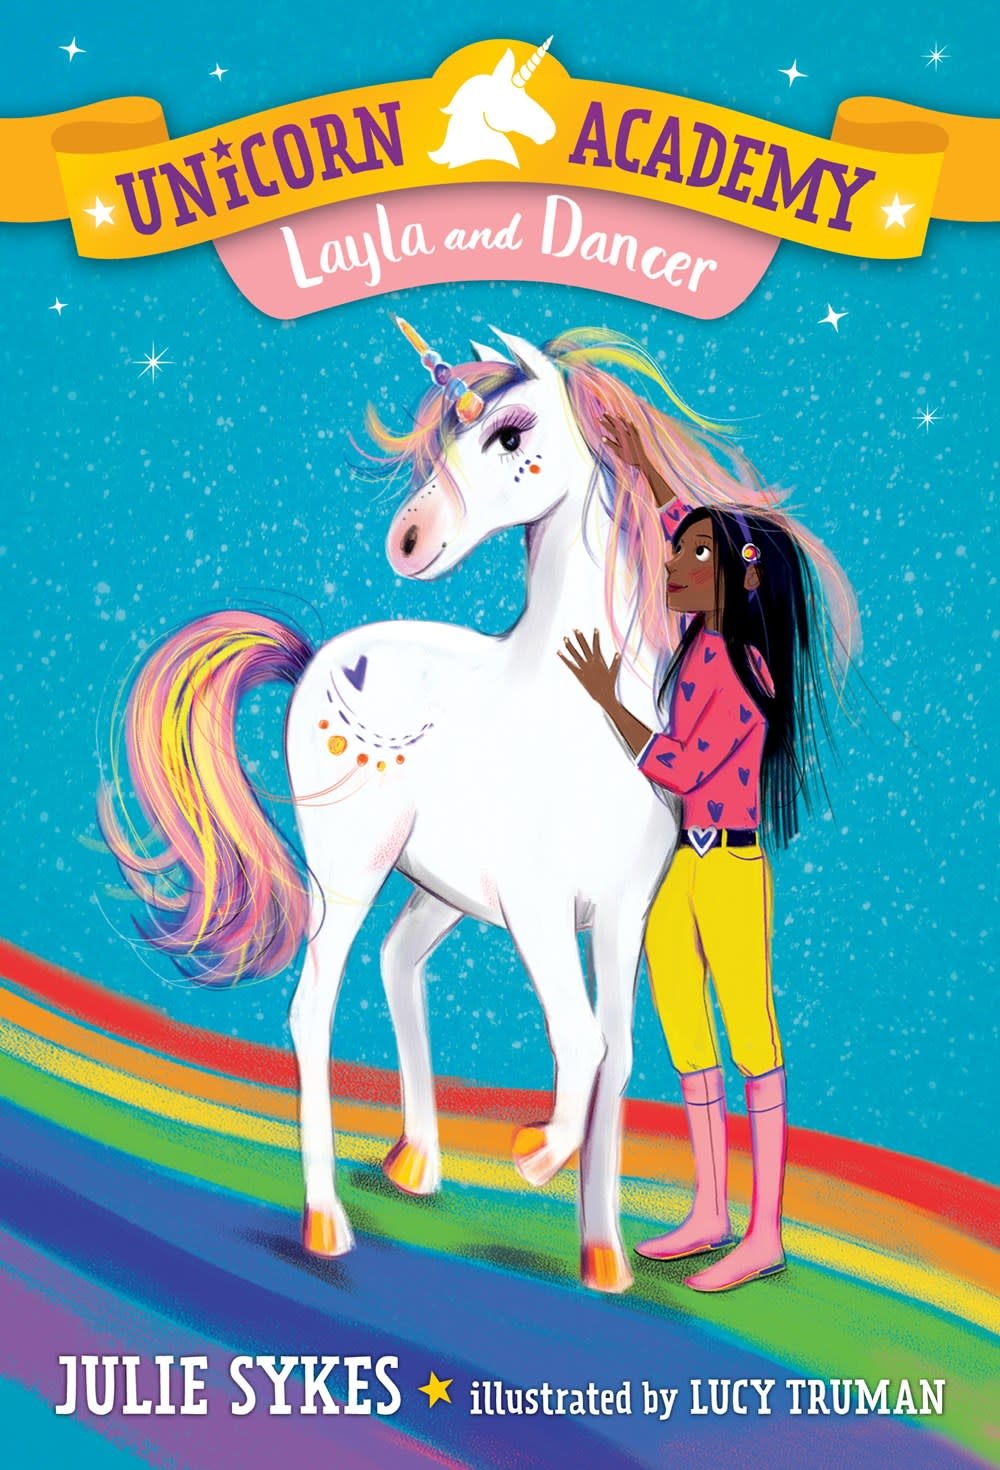 Random House Books for Young Readers Unicorn Academy #5 Layla and Dancer